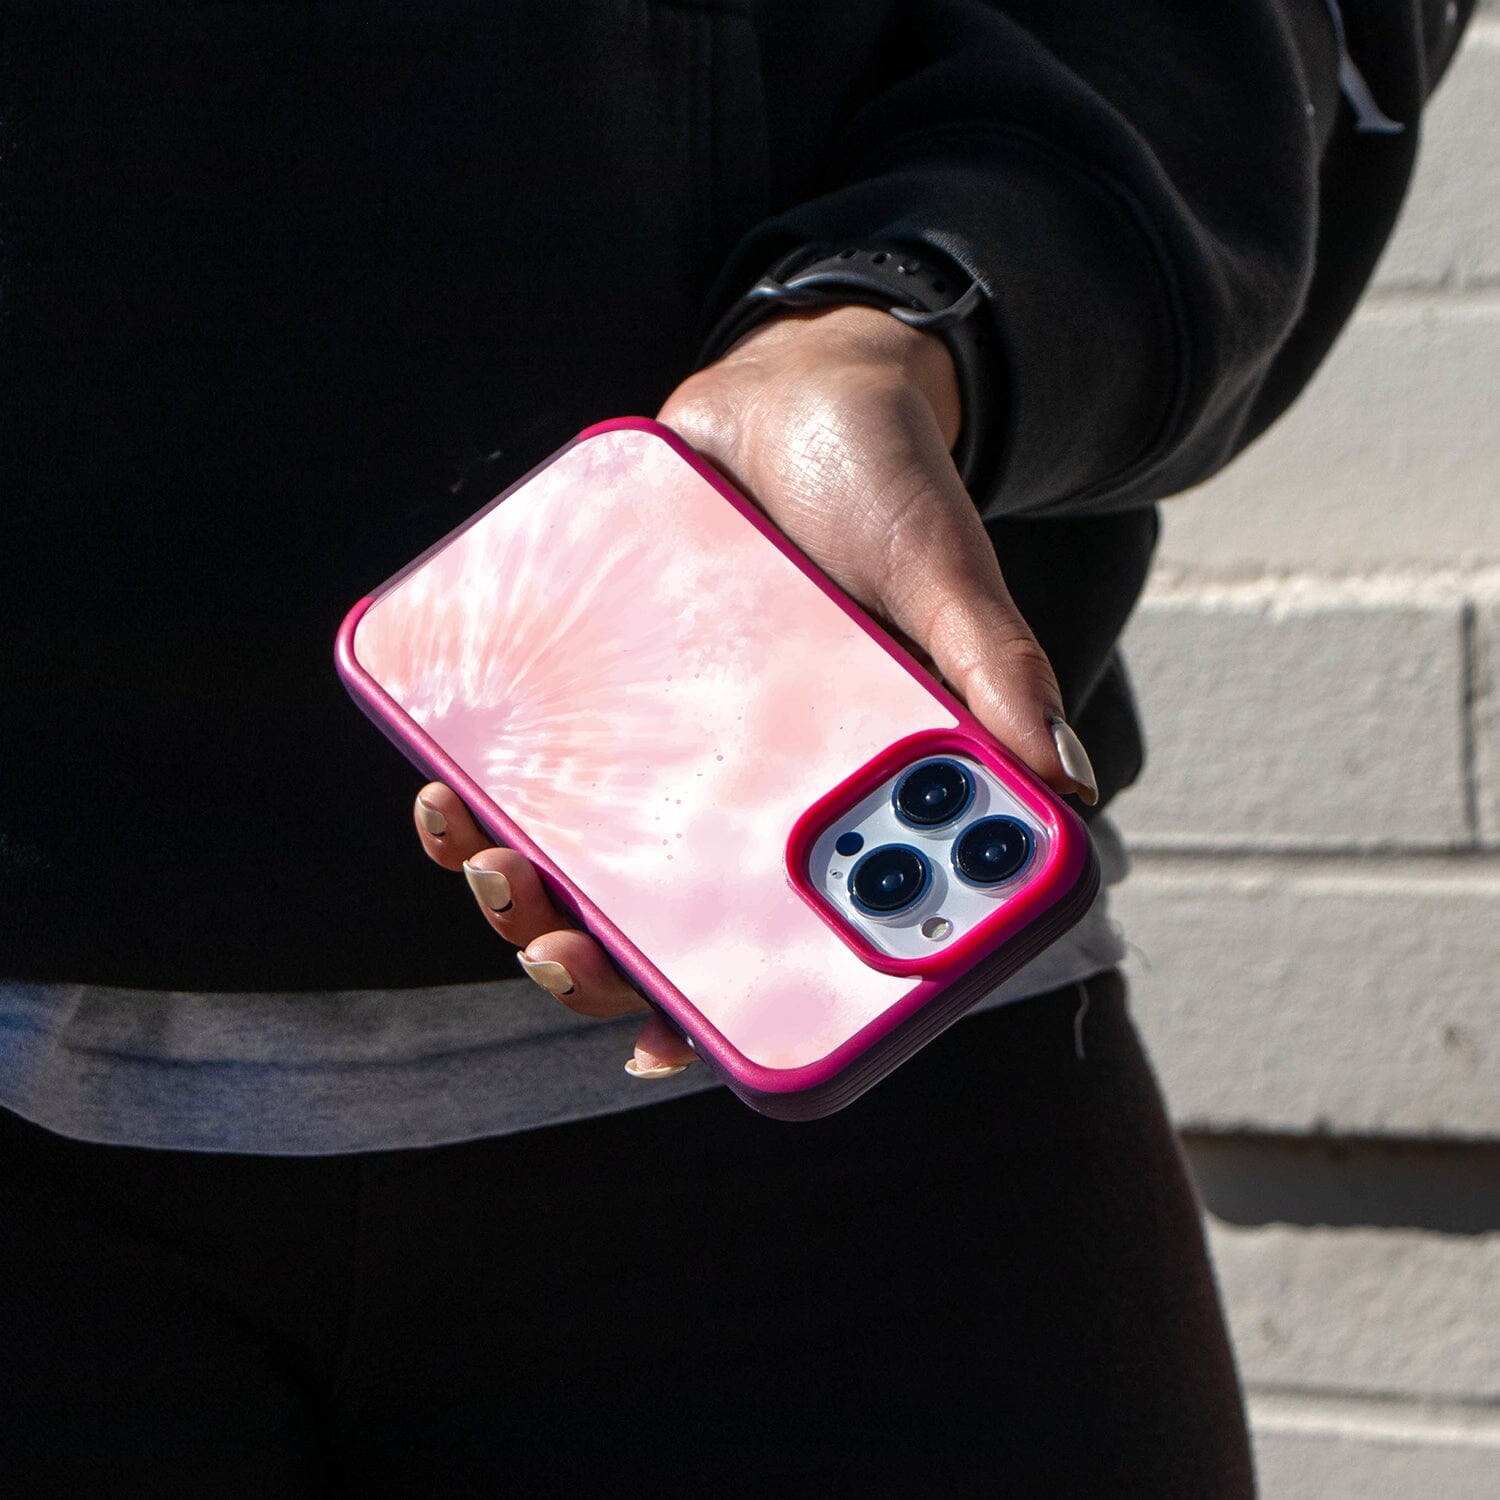 iPhone 14 Pro Pink Bubble Gum Tie Dye Design Case - Fremont Grip (Girl in Black holding a Phone)